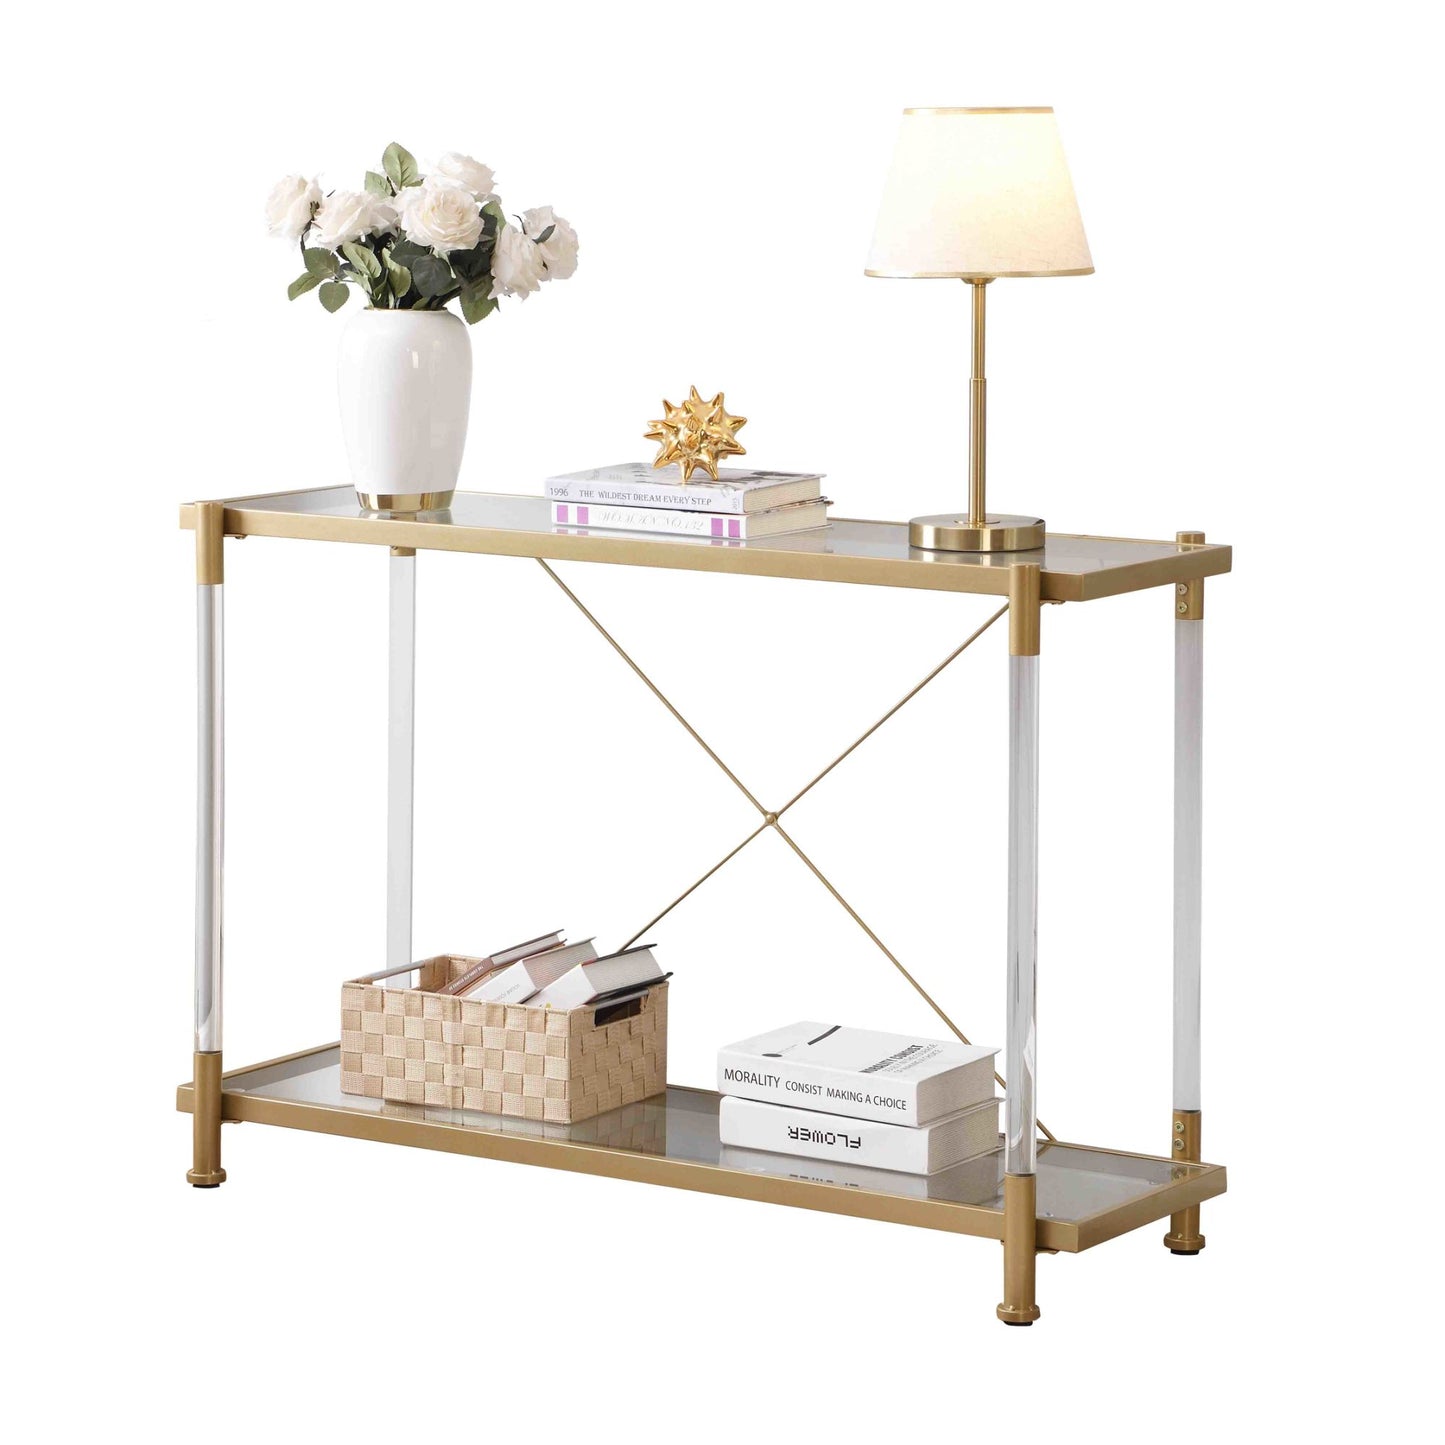 43.31'' Golden Glass Sofa Table, Acrylic Side Table, Console Table for Living Roome& Bedroom